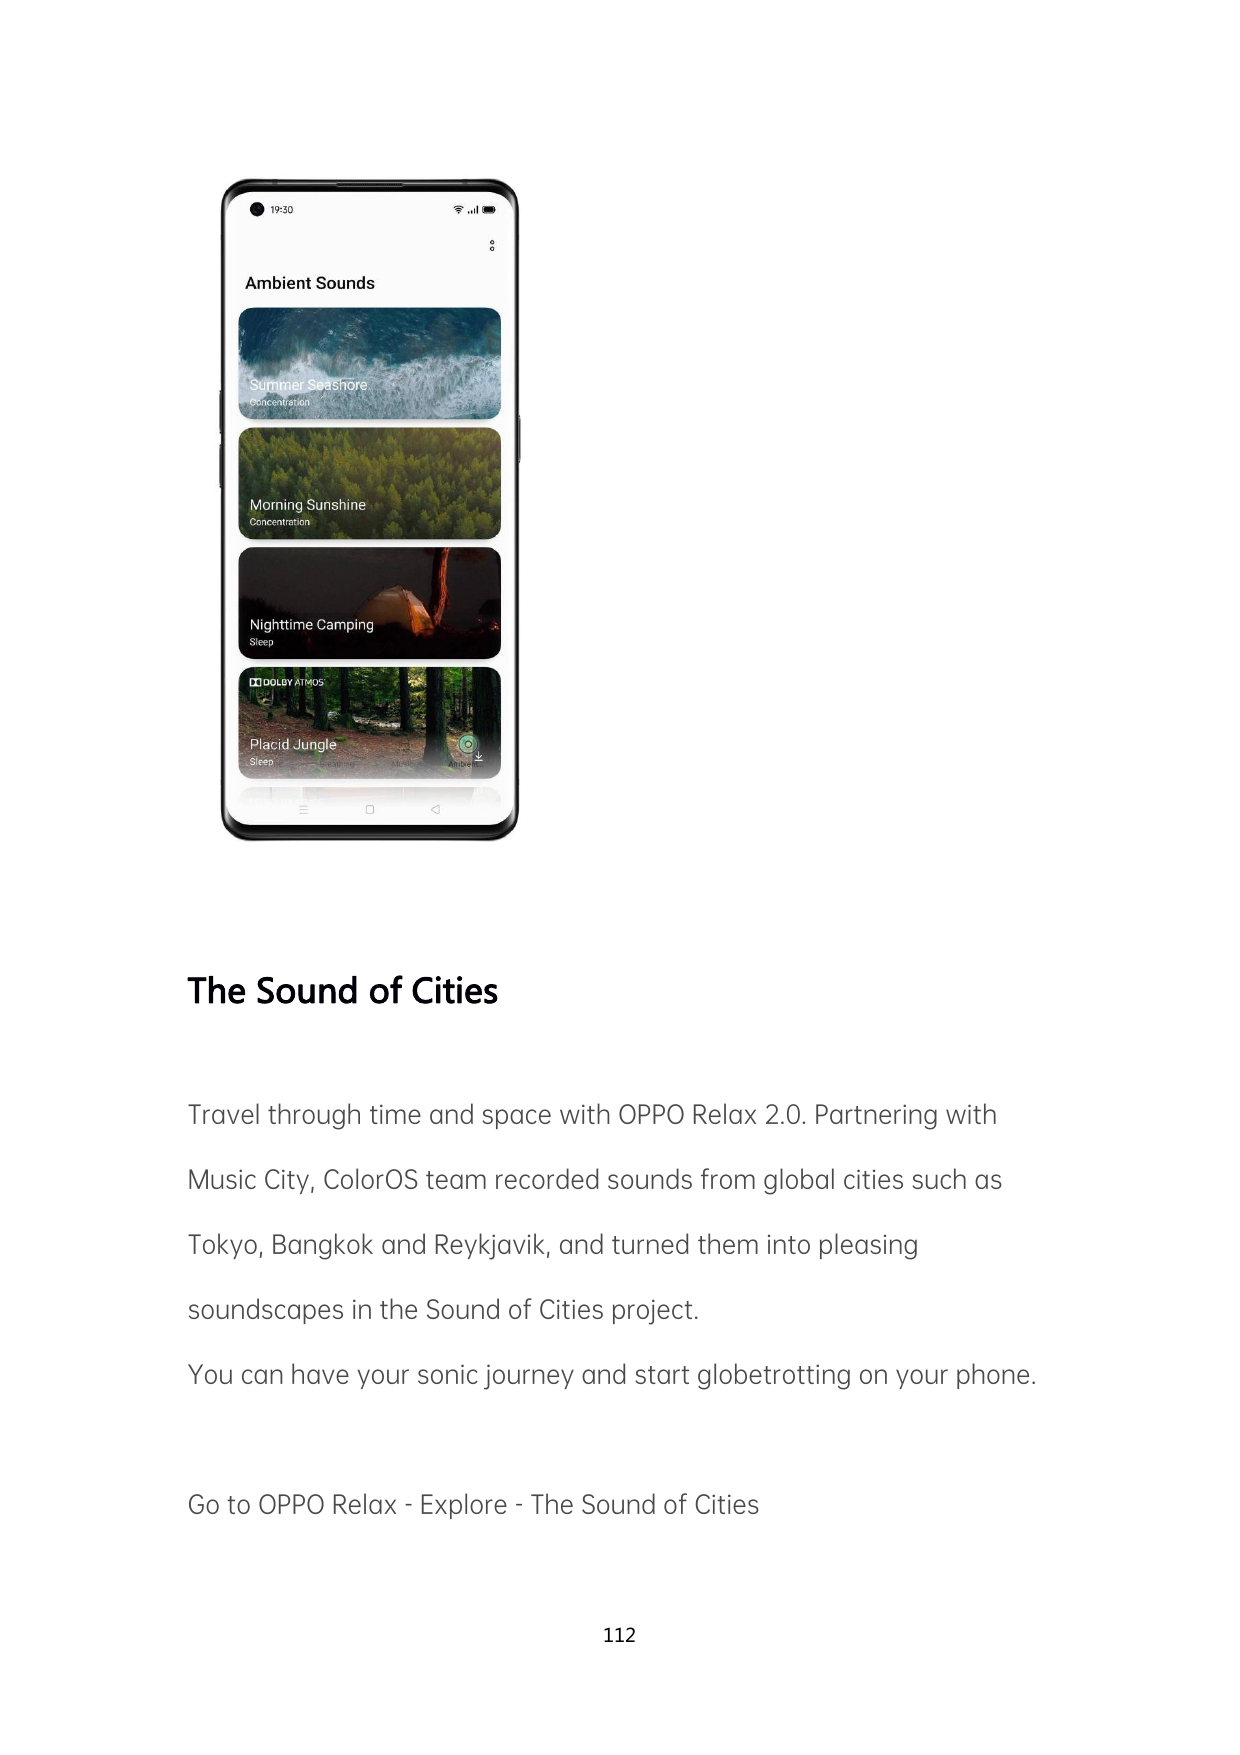 The Sound of CitiesTravel through time and space with OPPO Relax 2.0. Partnering withMusic City, ColorOS team recorded sounds fr